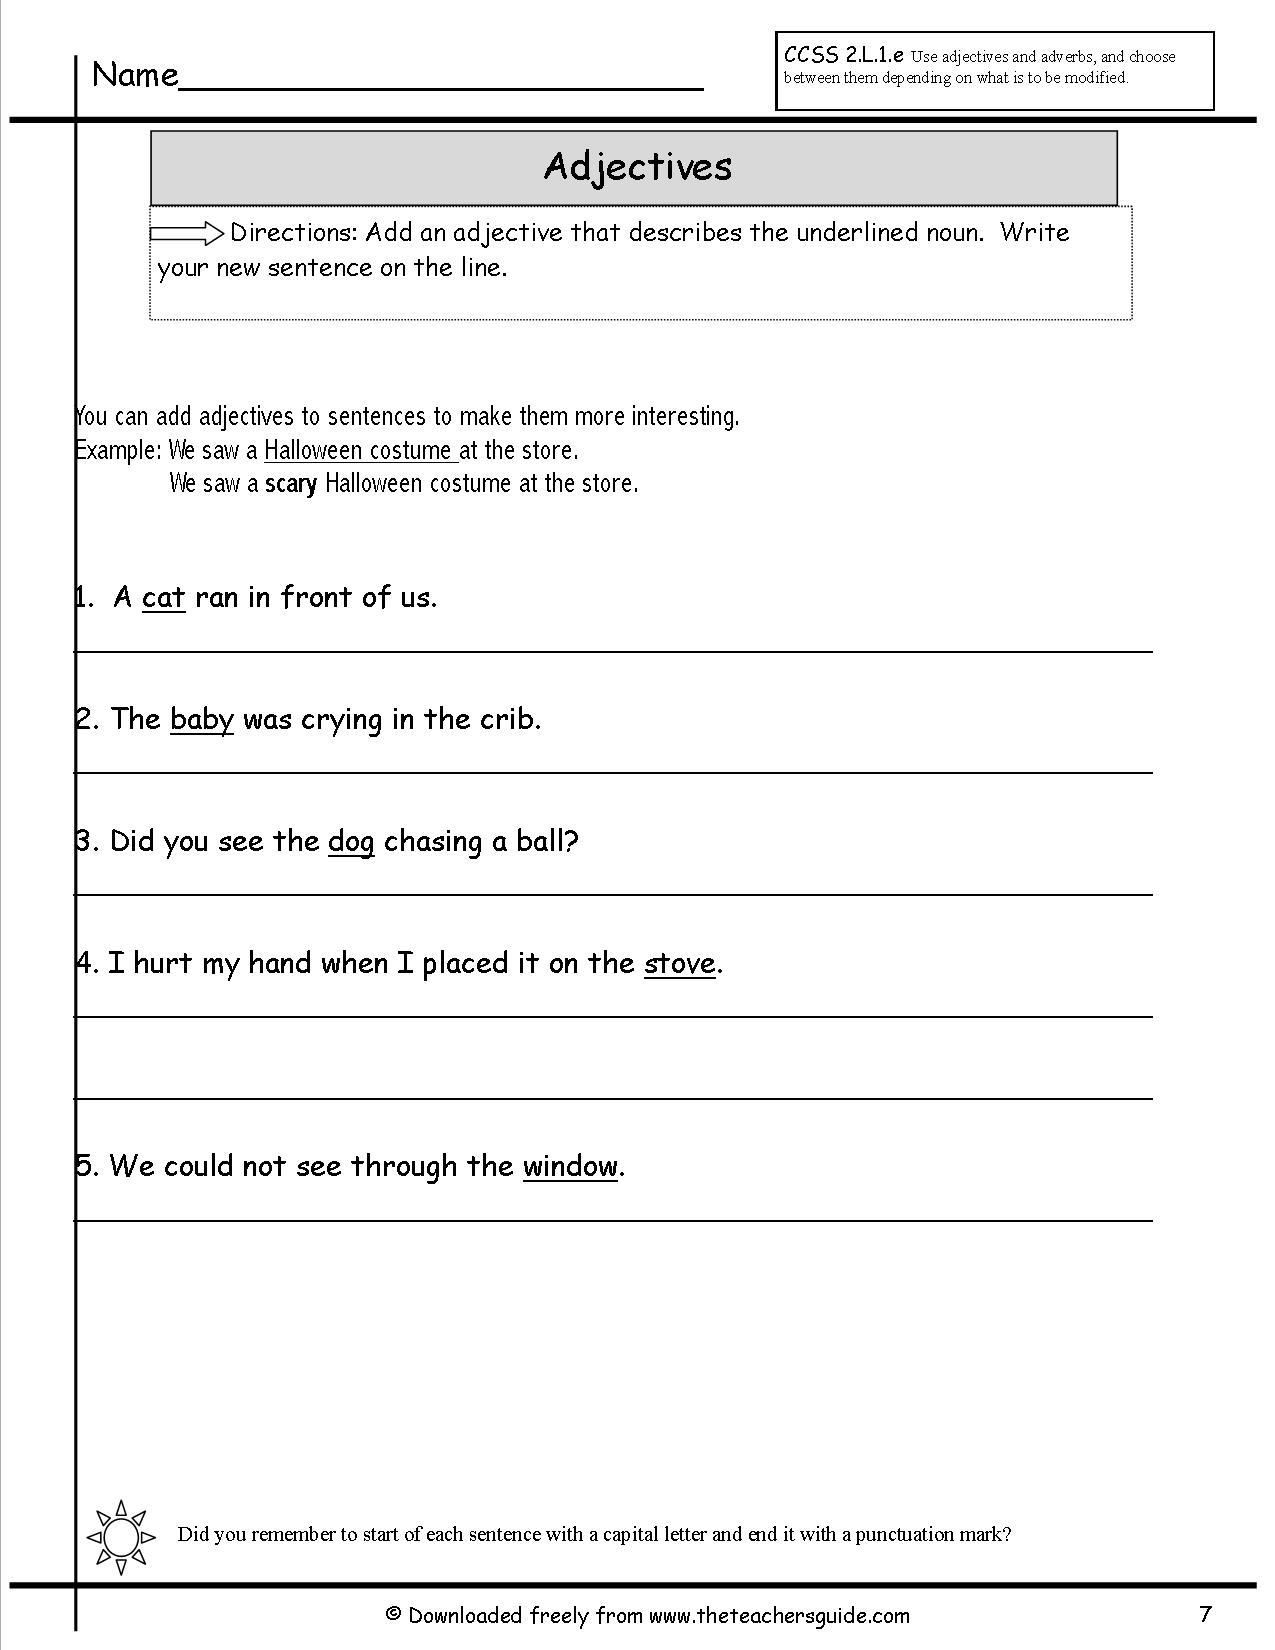 identify-adjectives-in-a-sentence-worksheet-turtle-diary